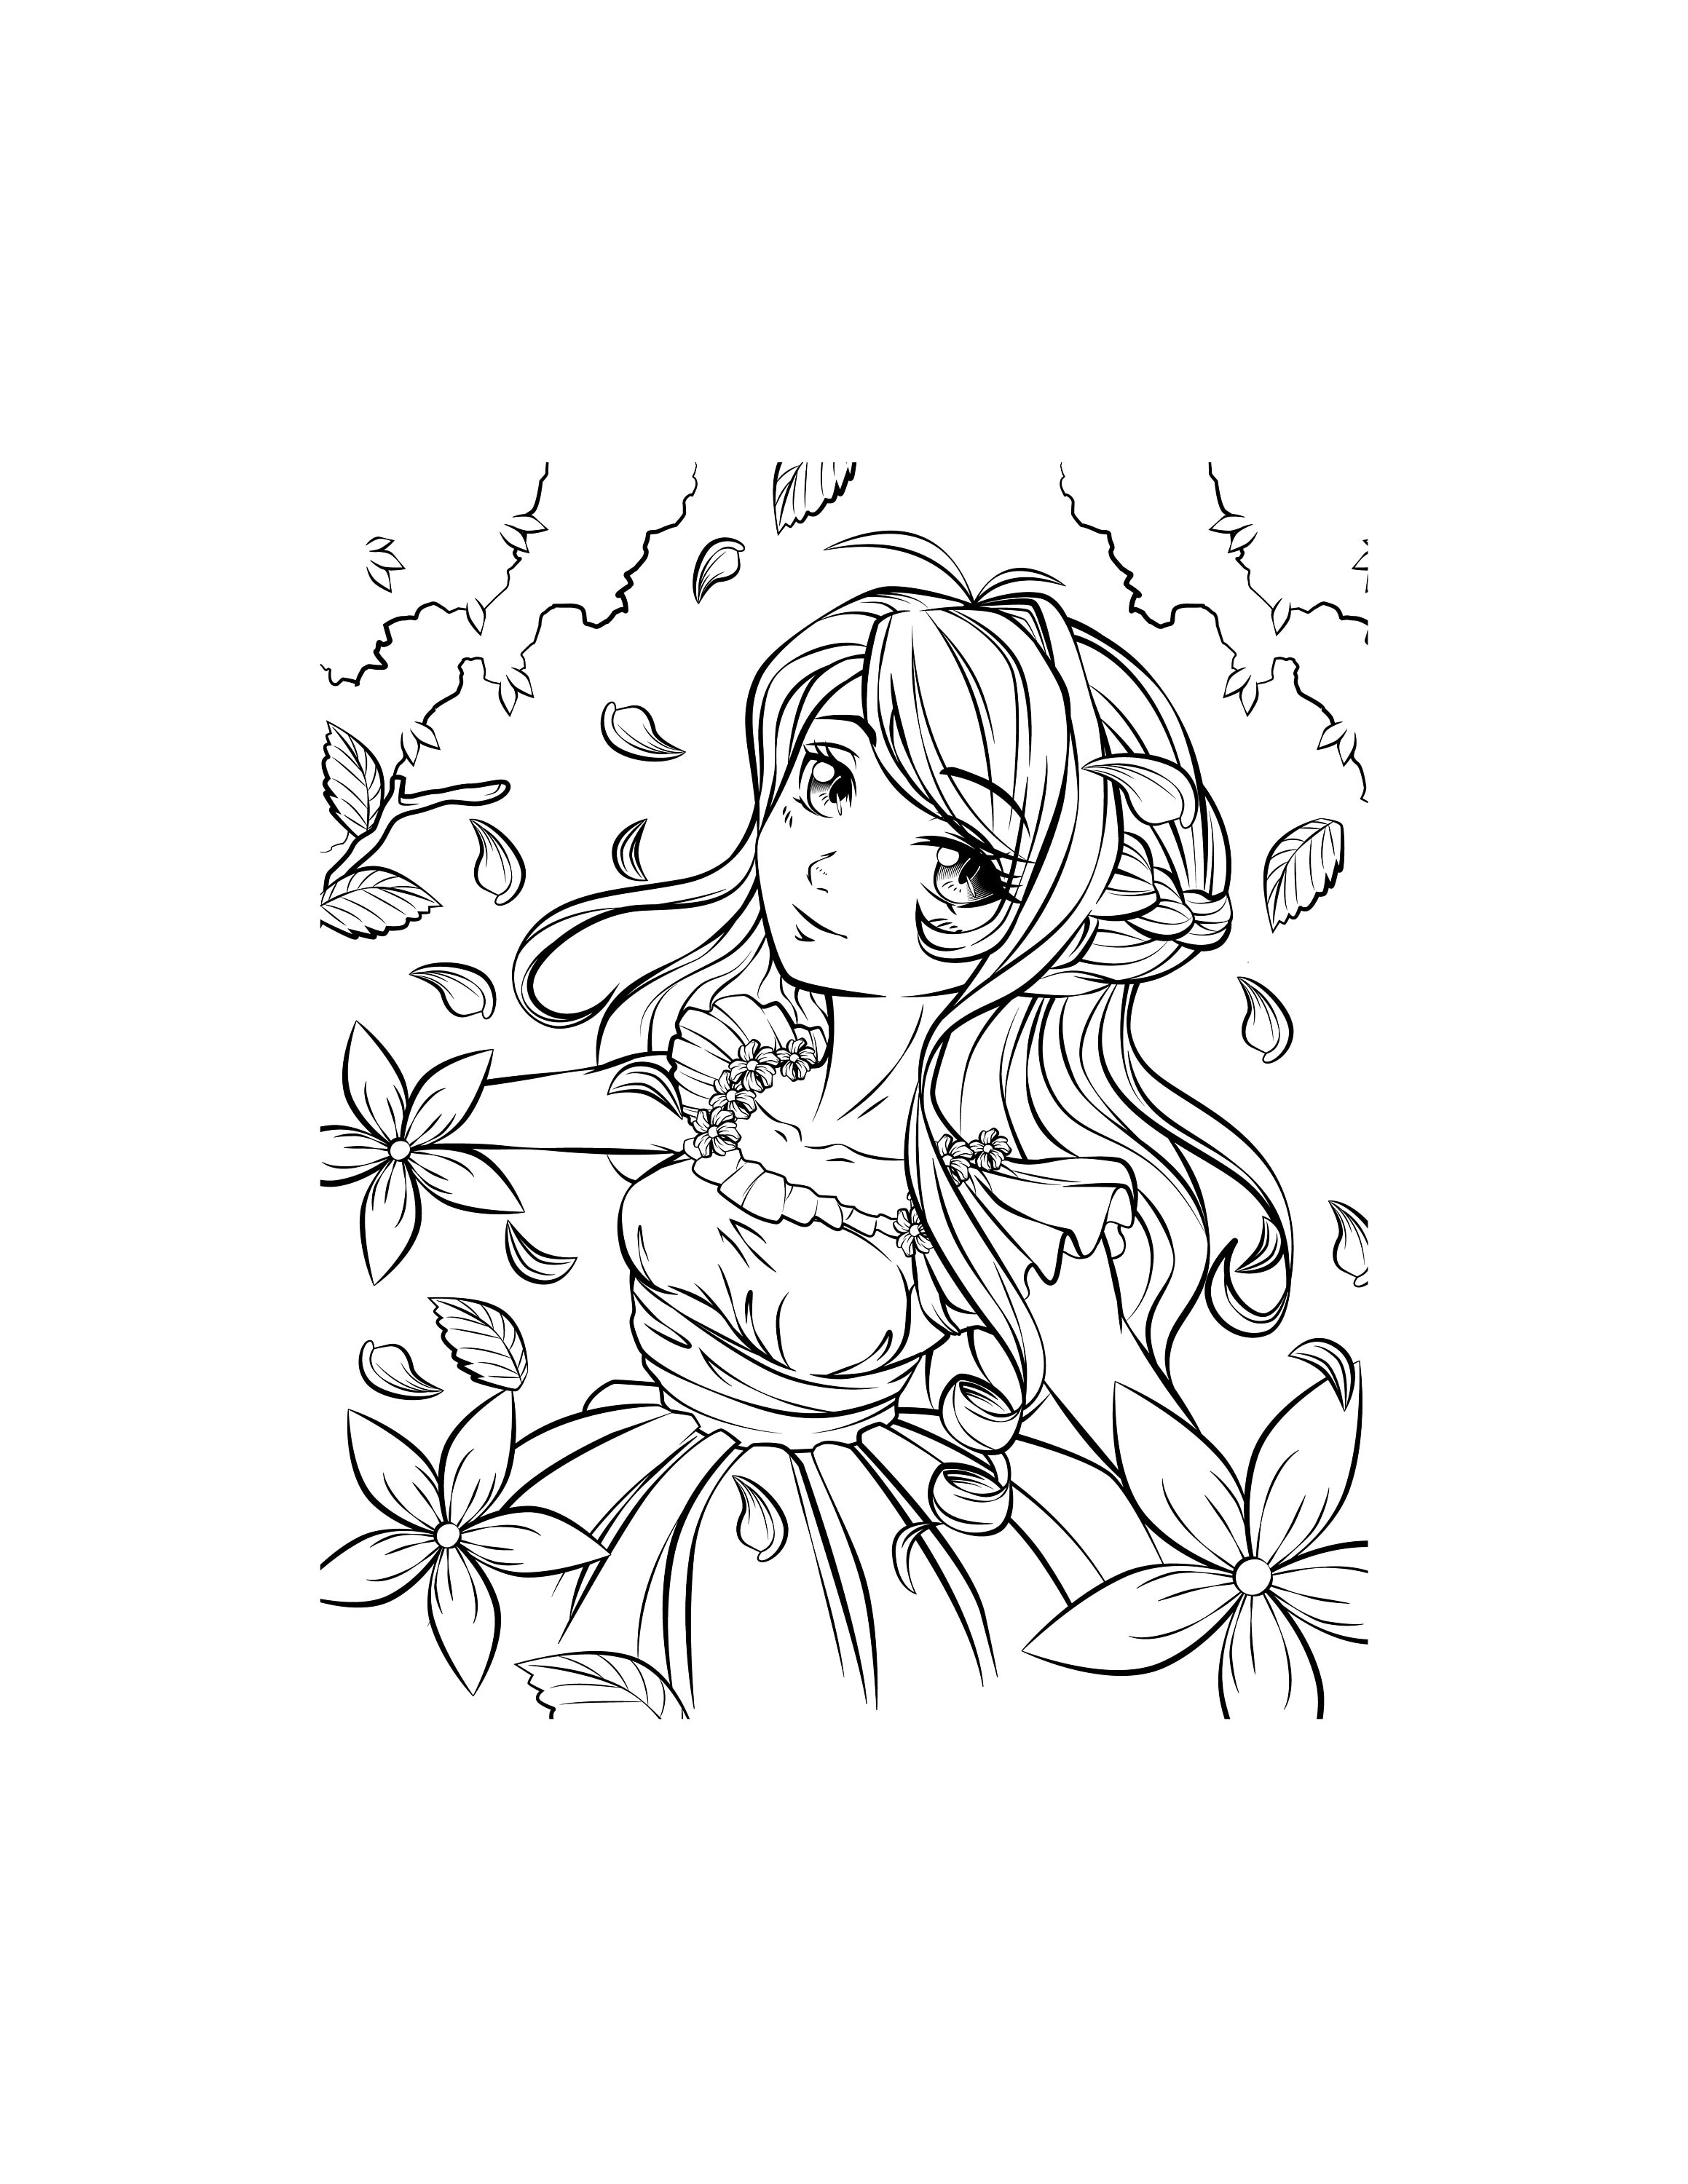 Anime Girl Coloring Page For Girls  Turkau